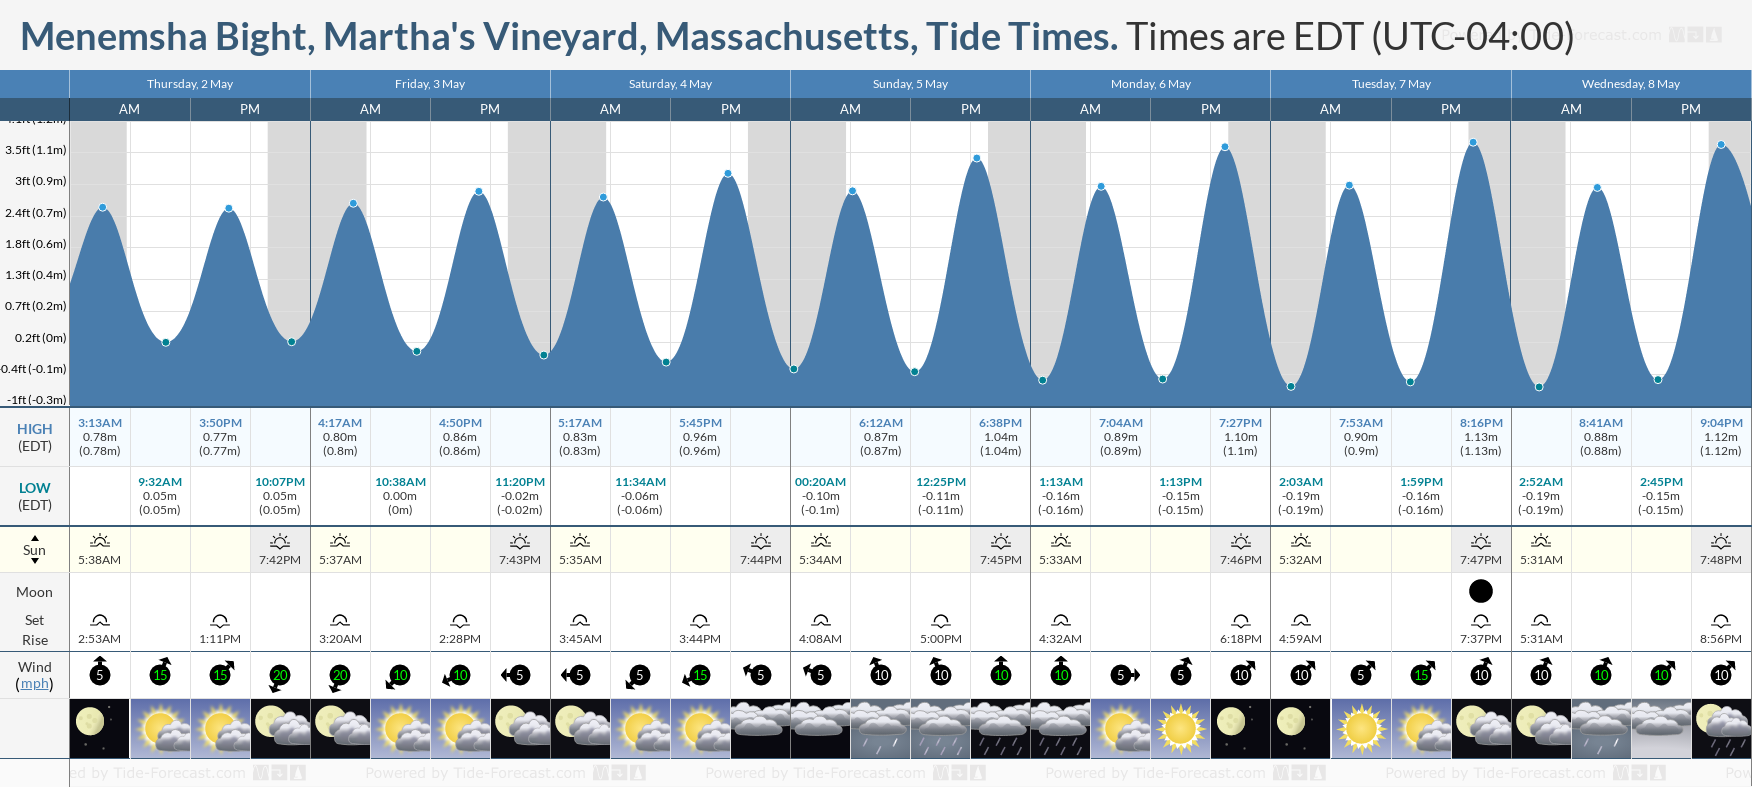 Menemsha Bight, Martha's Vineyard, Massachusetts Tide Chart including high and low tide tide times for the next 7 days